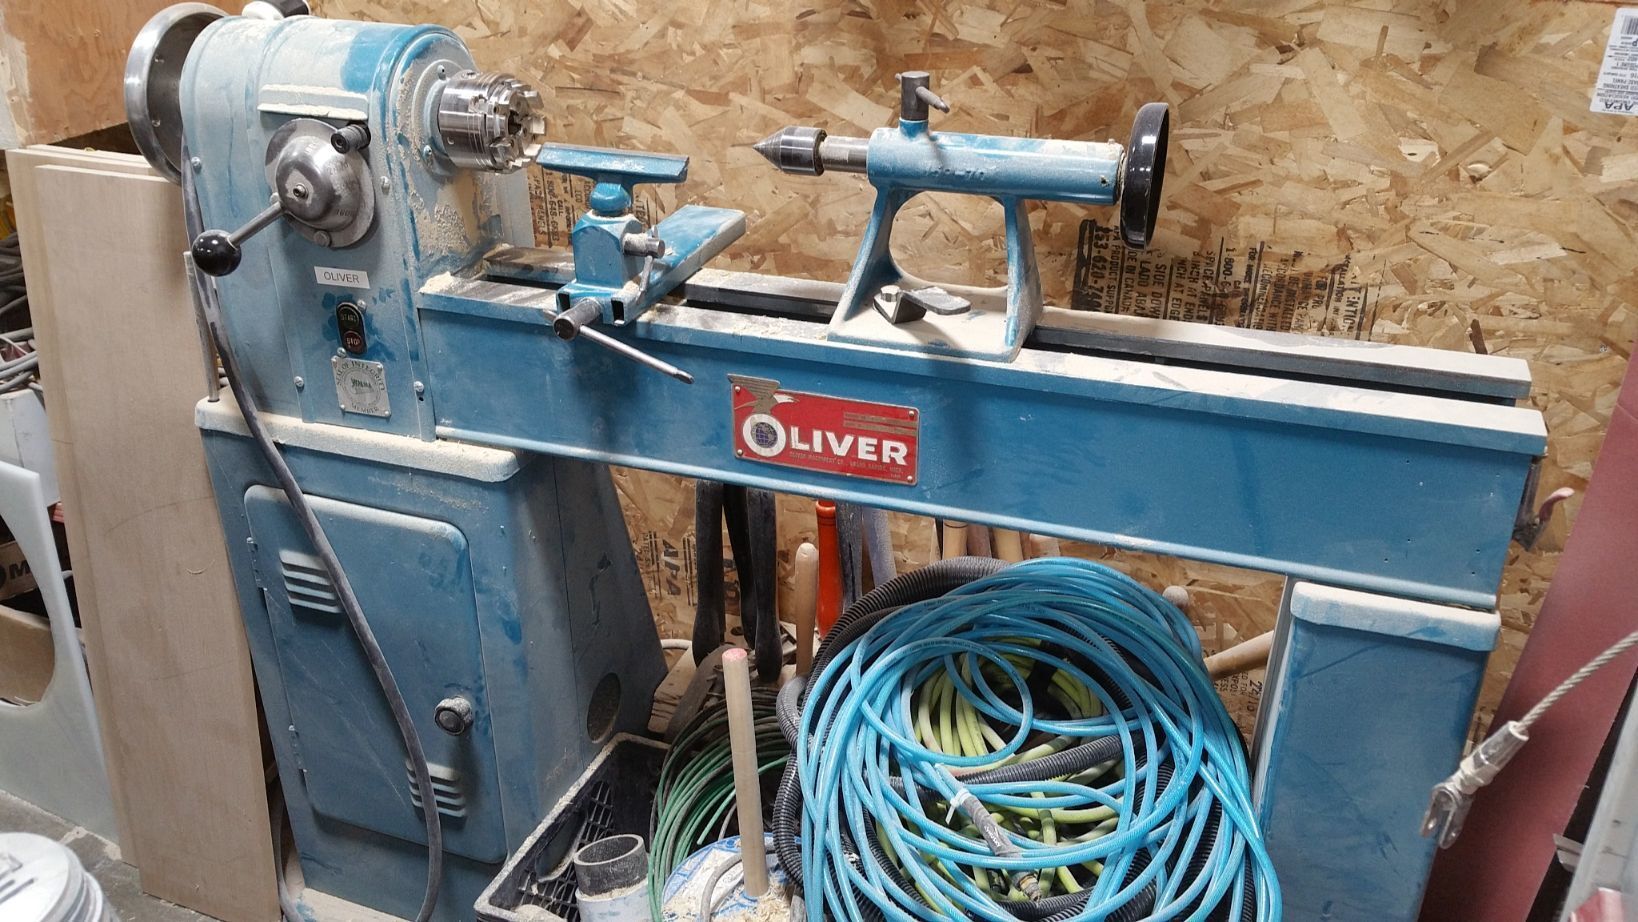 OLIVER MACHINERY COMPANY 167 Sold Equipment | MD Equipment Services LLC